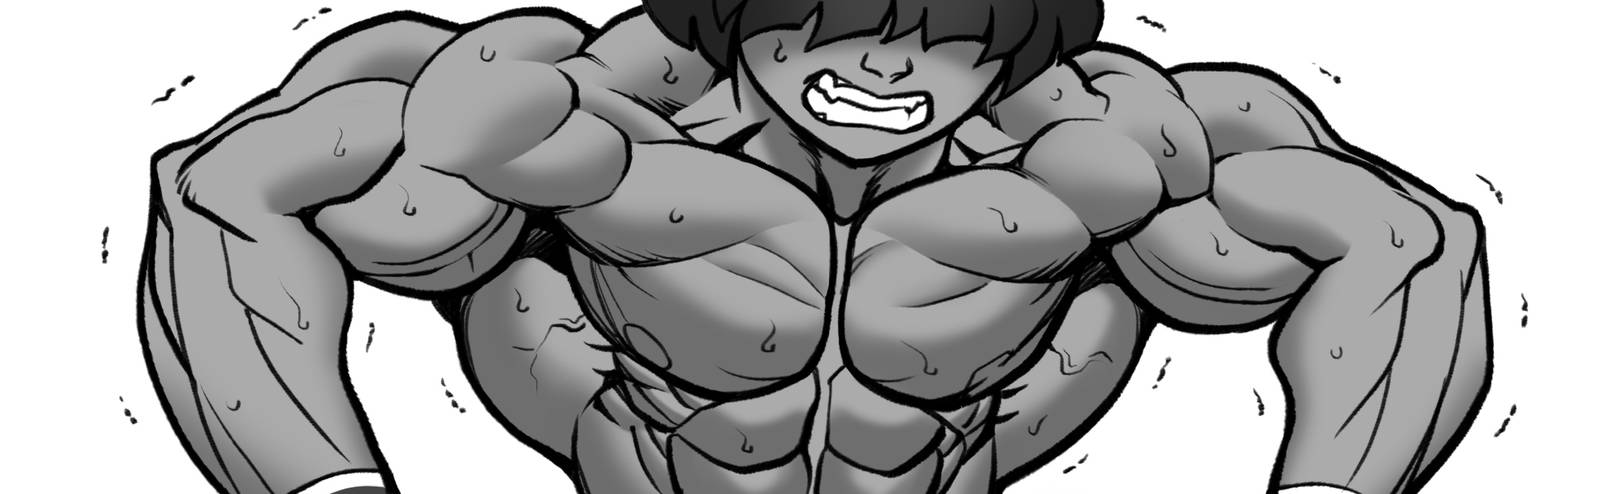 Experiment muscle growth animation by Pokkuti on DeviantArt.